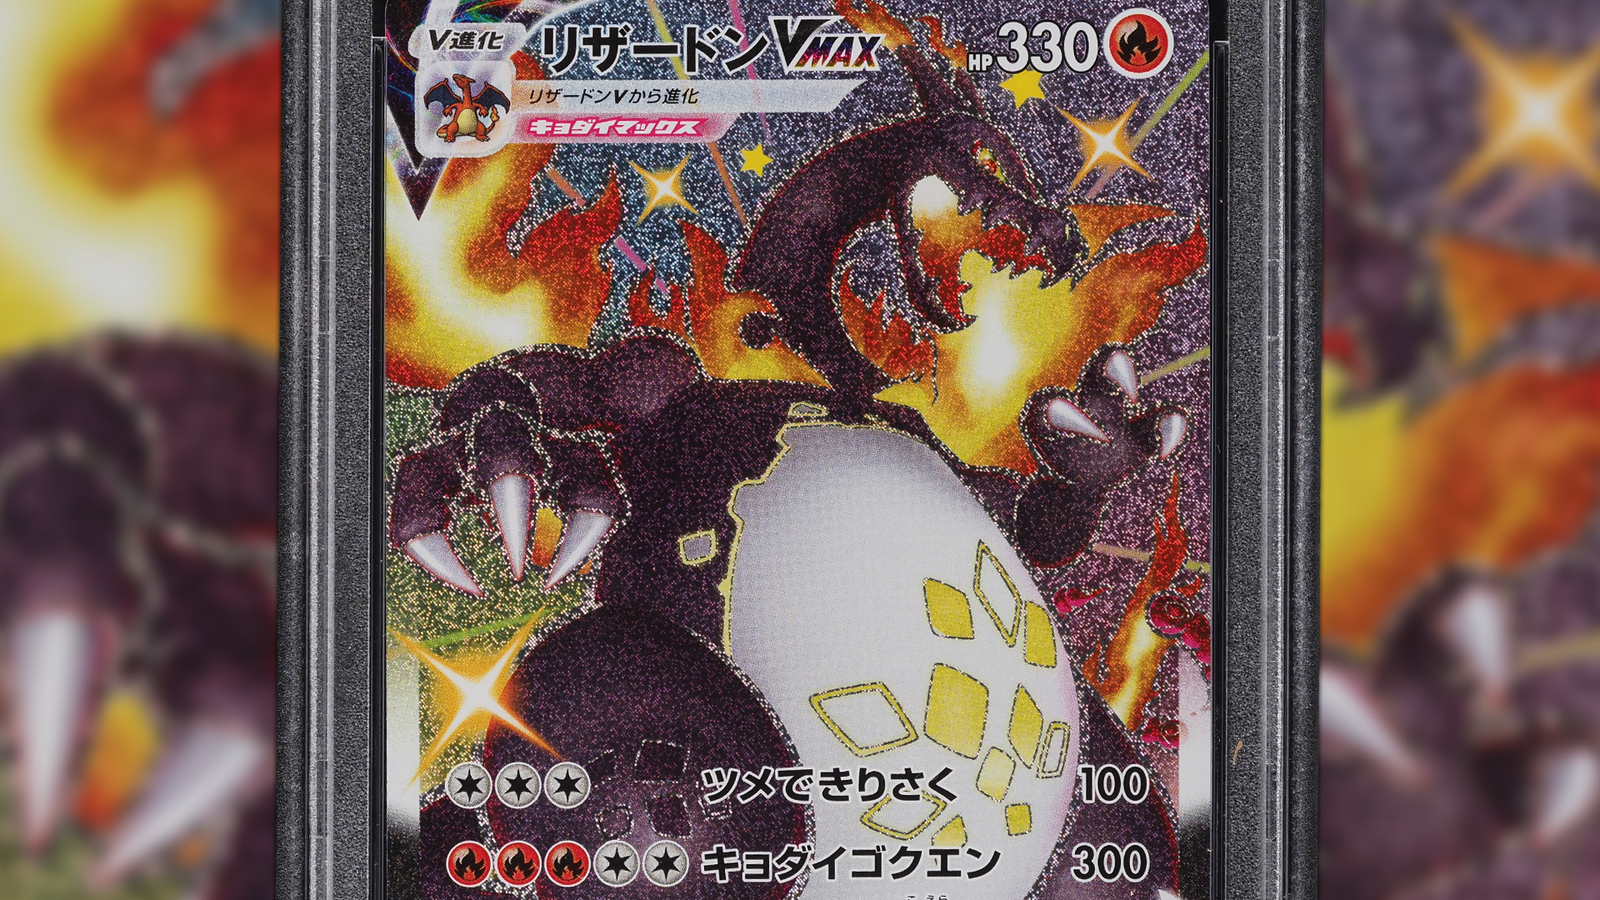 HO-OH Fire Lord VMAX Pokemon Card 